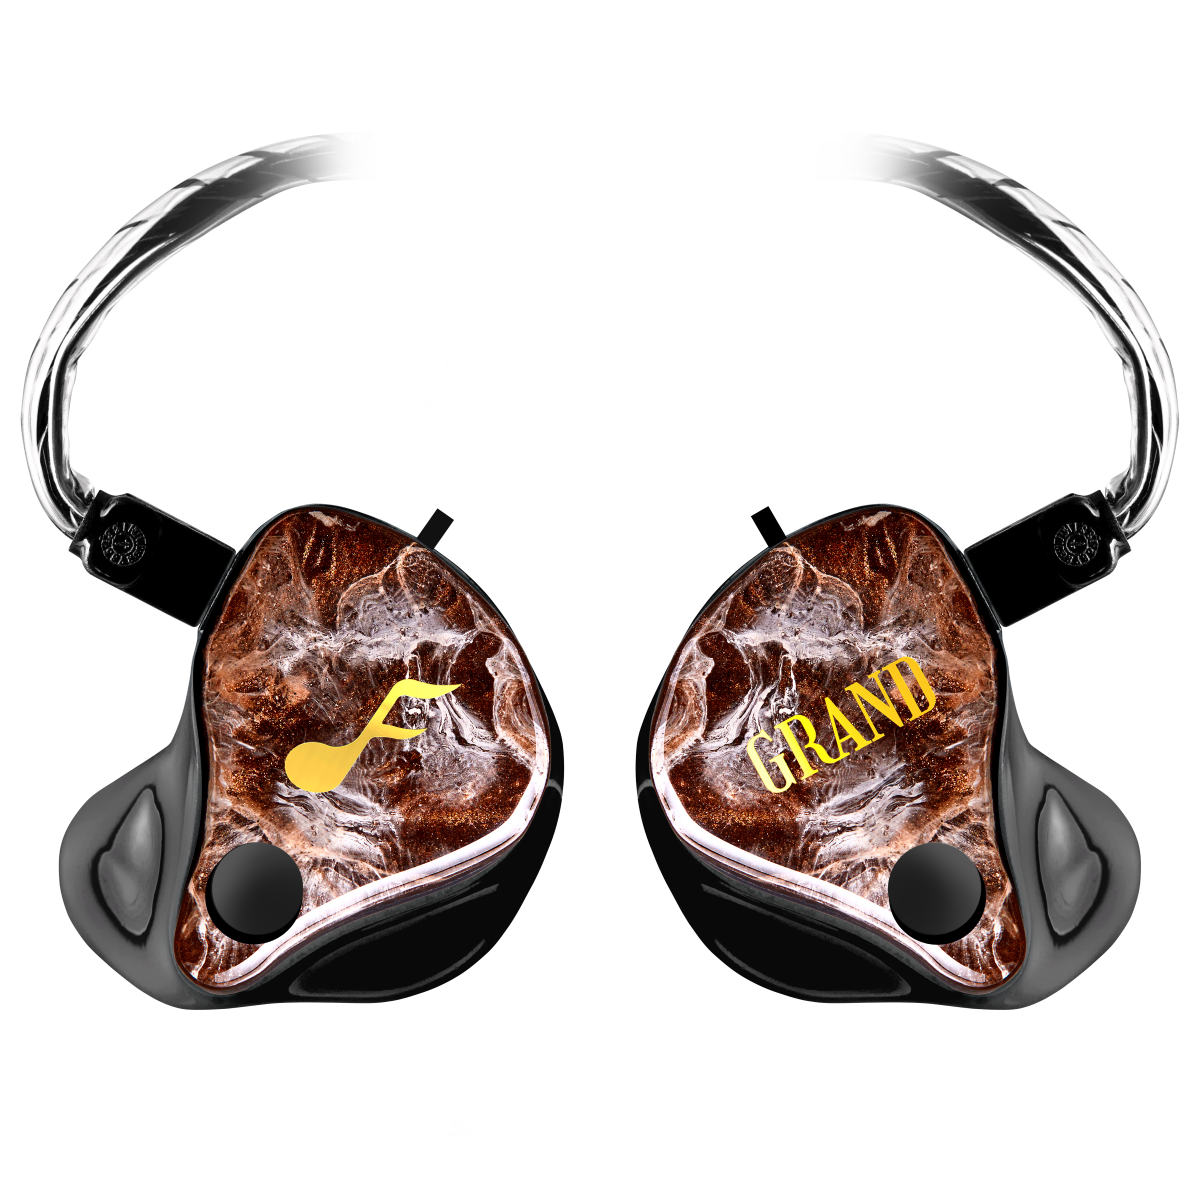 GRAND Maestro Custom IEM - Prices from 4629.00 to 4725.00